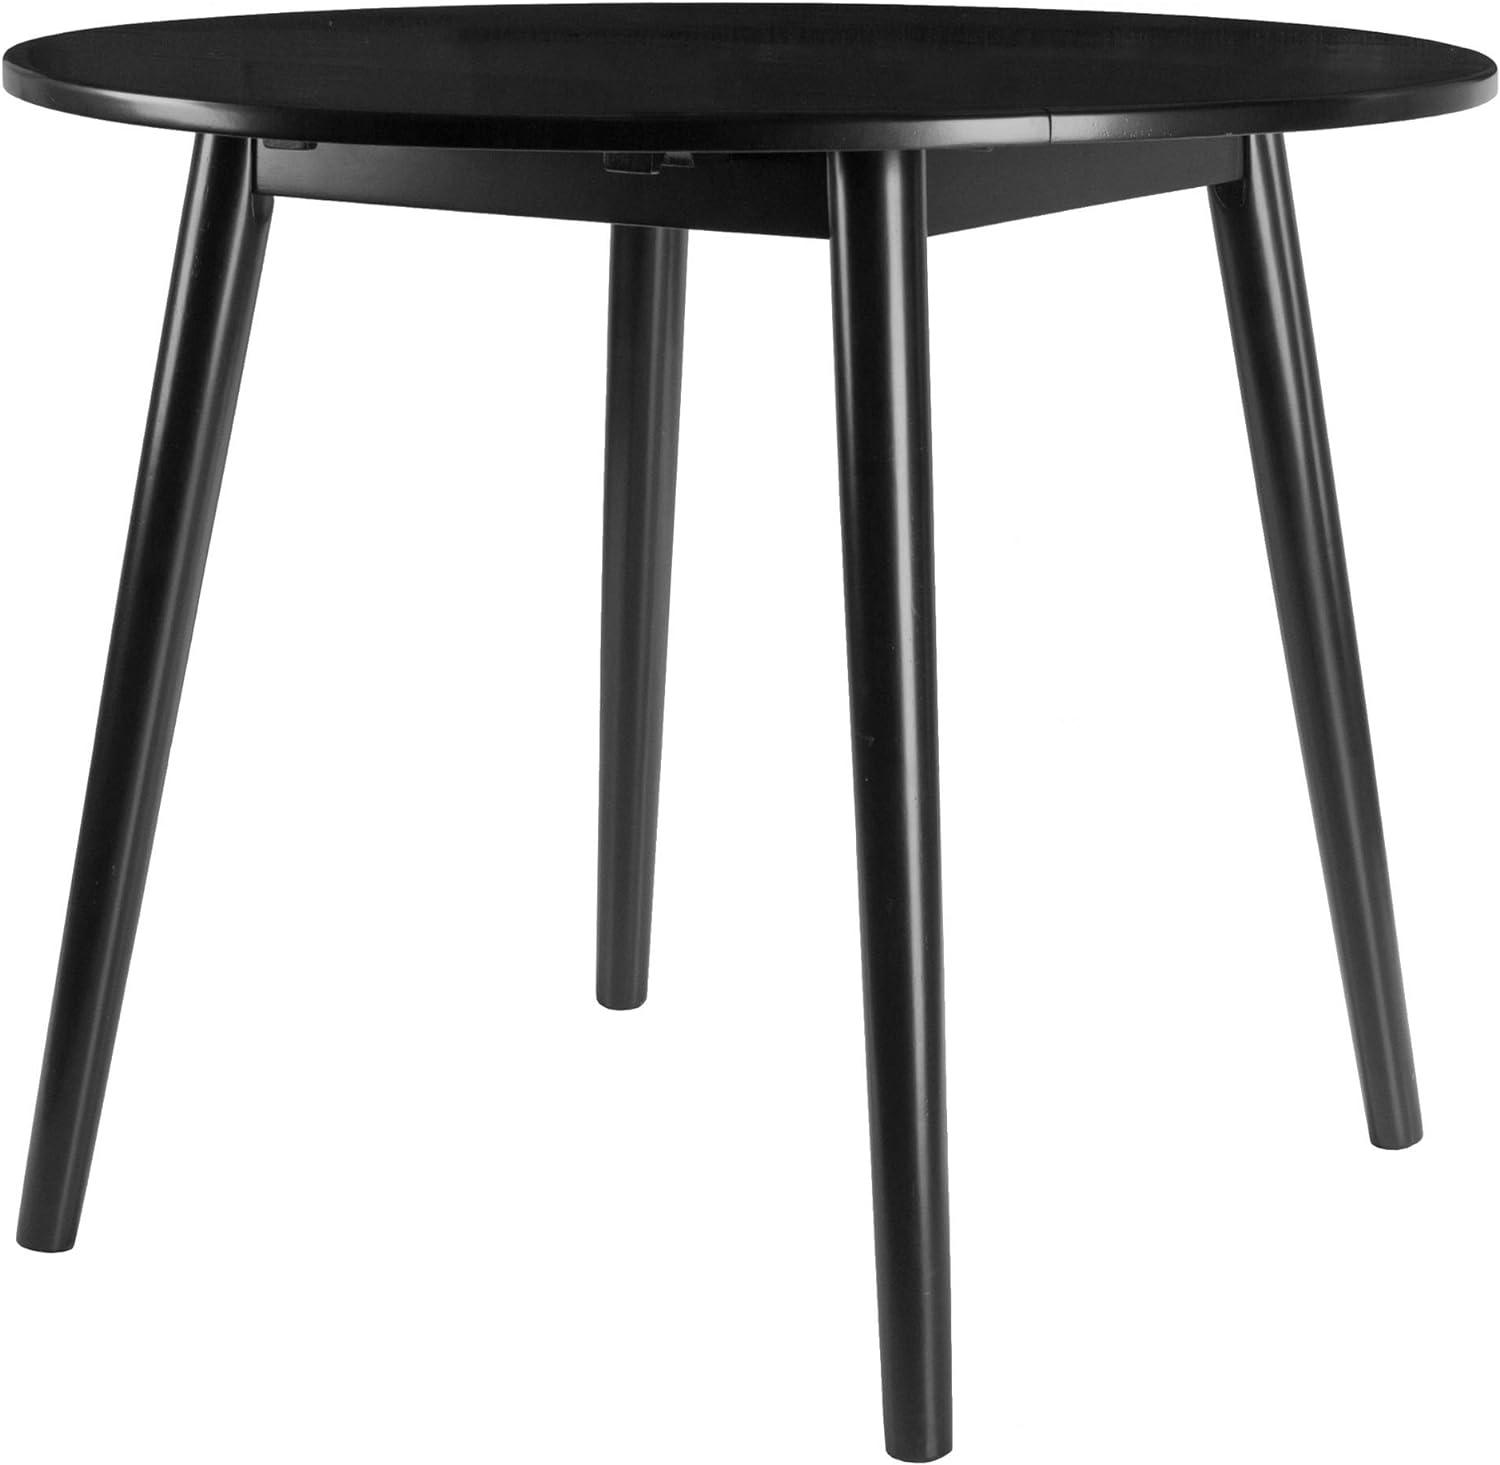 Mid-Century Modern Moreno Black Wood 36" Round Extendable Dining Table